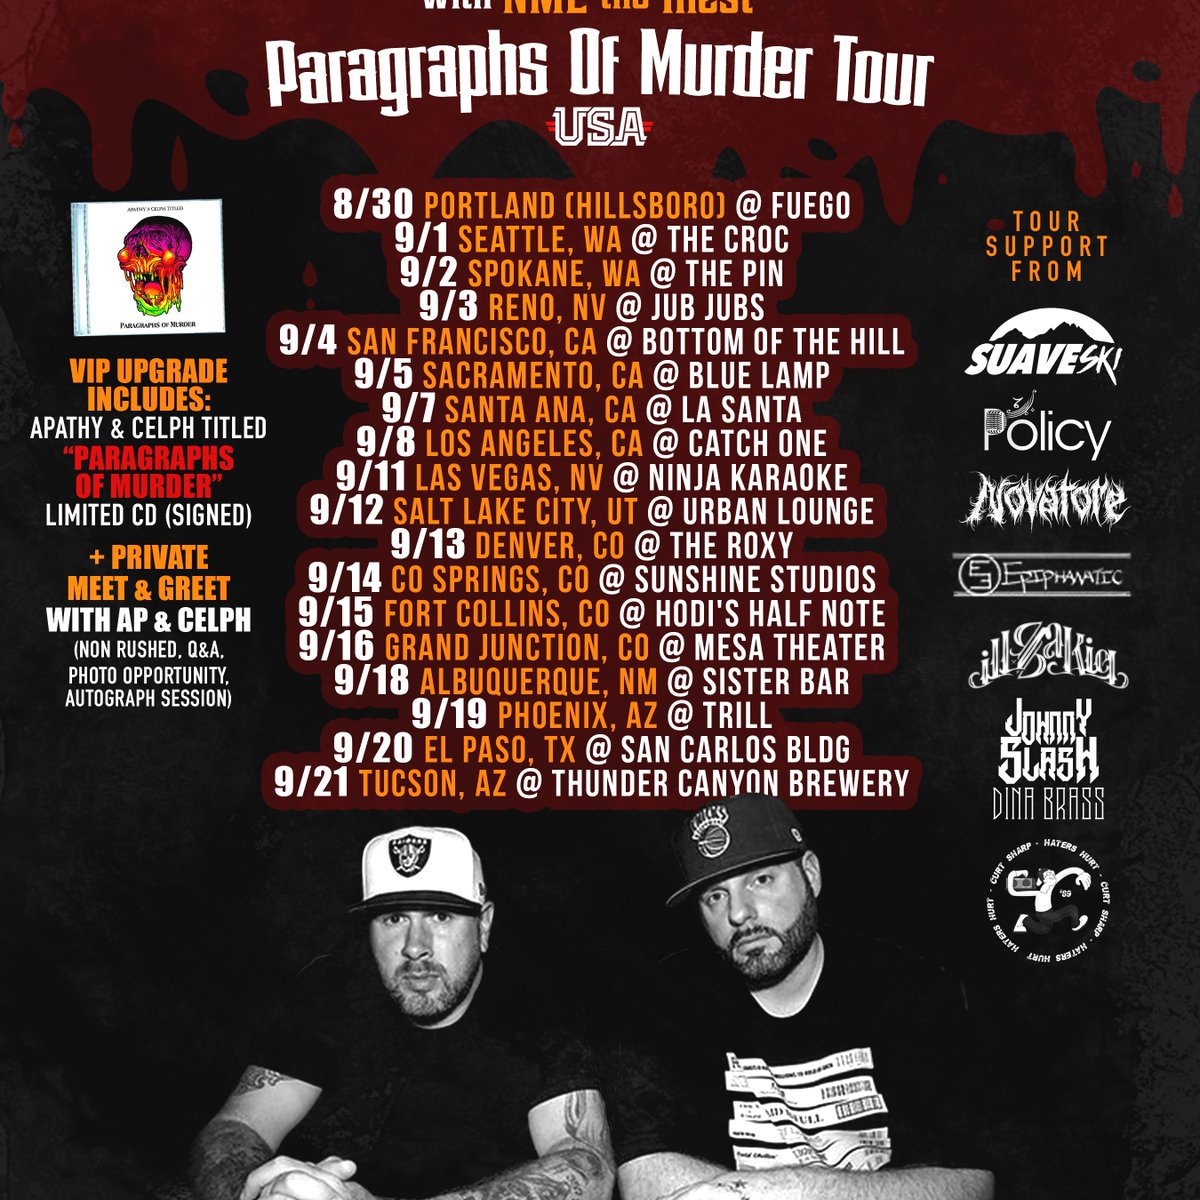 WESTERN USA: @ApathyDGZ + @CelphTitled hit the road beginning this FRI (8/30) in Portland, OR - Don't miss out!